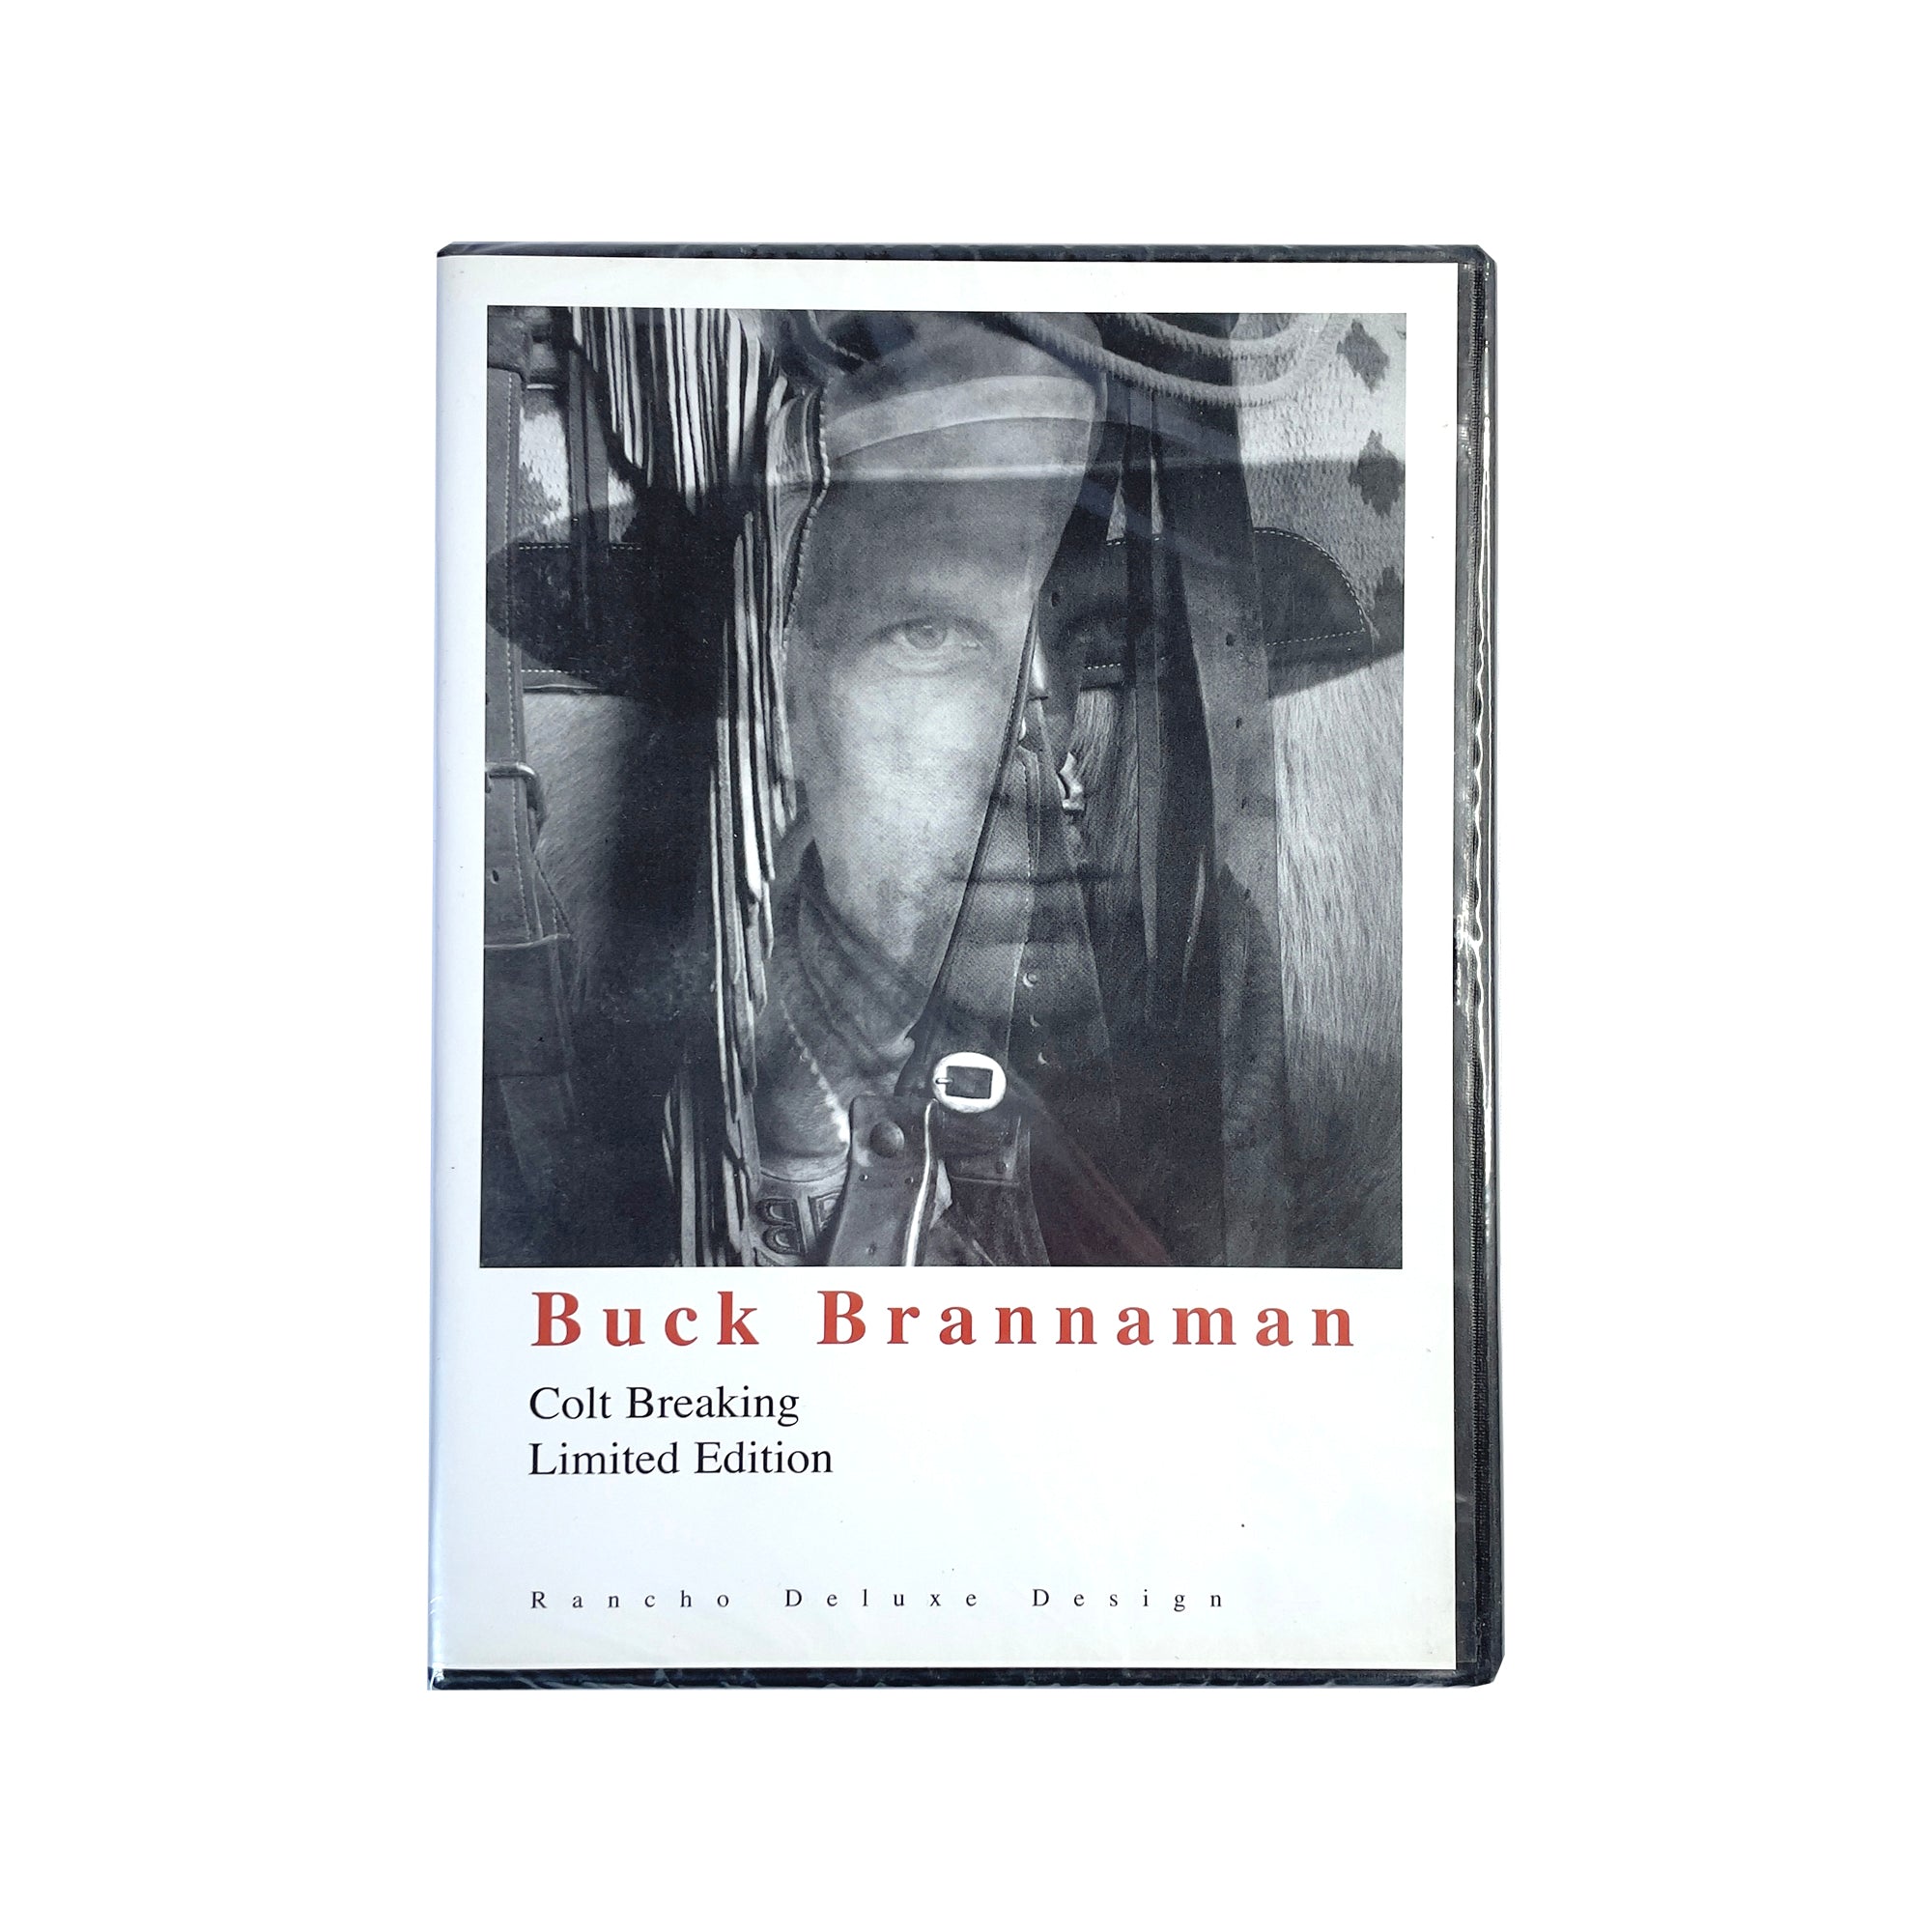 Colt Breaking Limited Edition DVD by Buck Brannaman